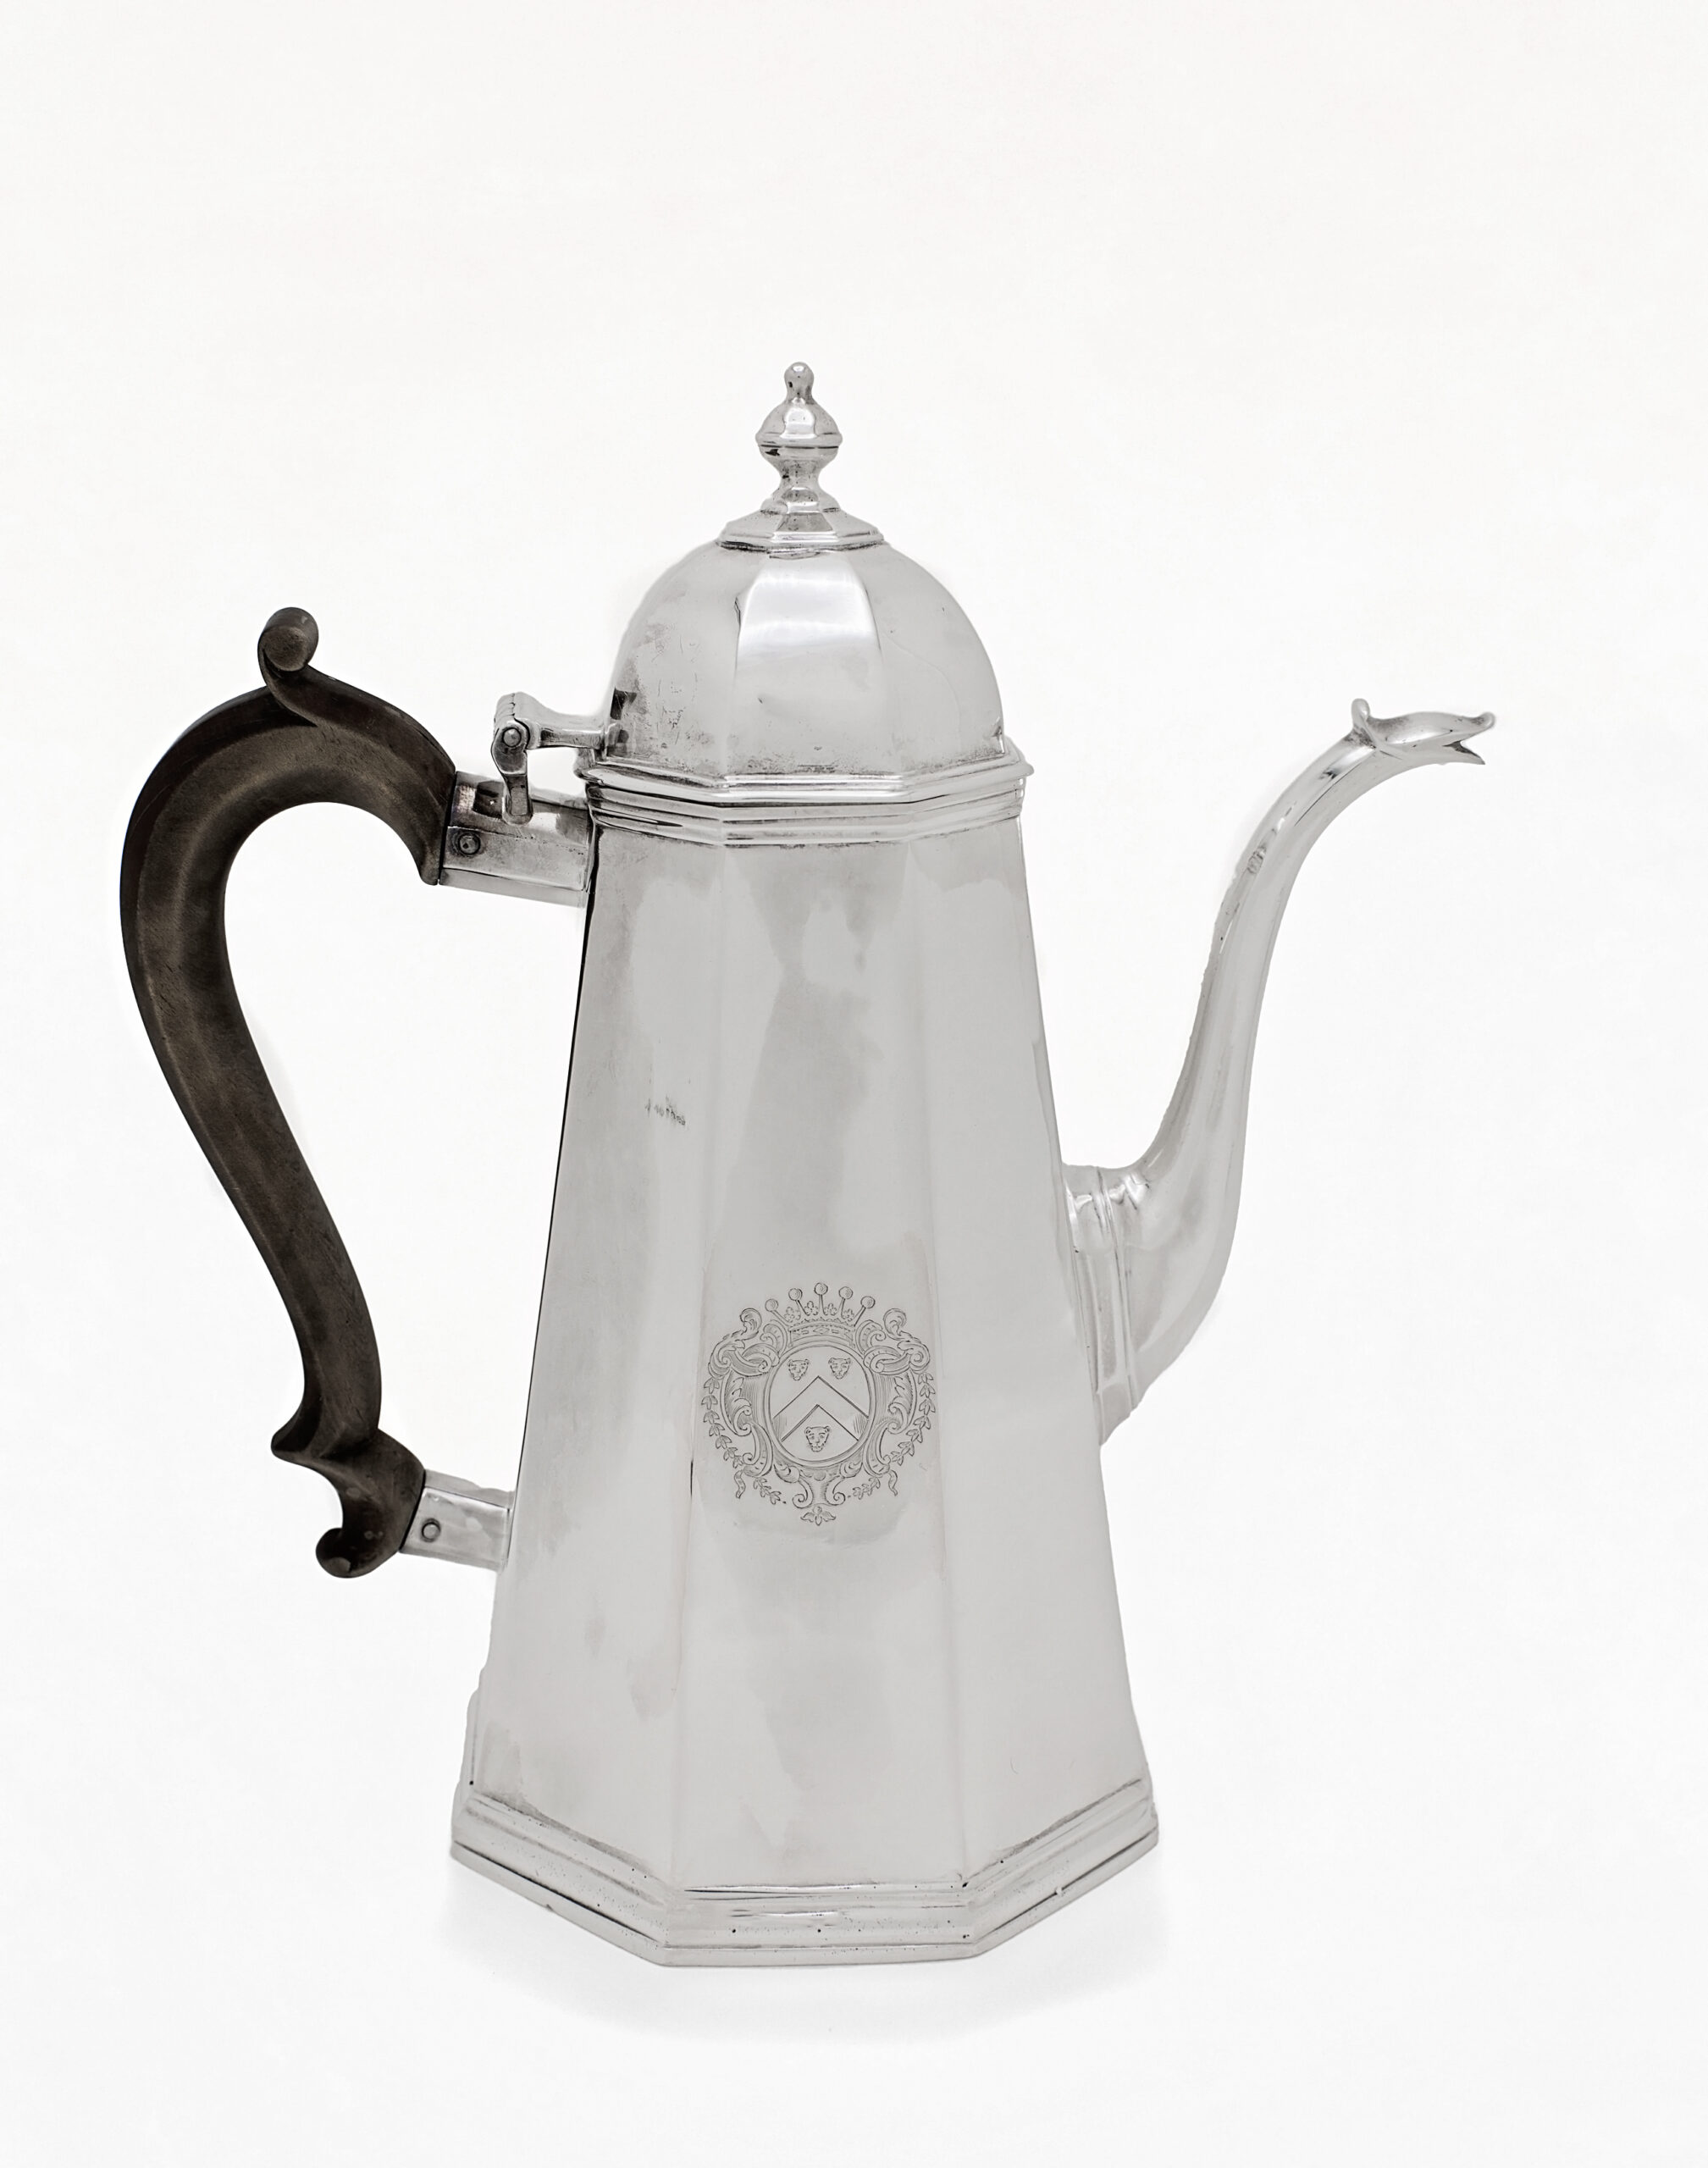 https://wylerantiques.com/wp-content/uploads/2023/05/wyler-antiques-Queen-Anne-silver-coffee-pot-scaled.jpg